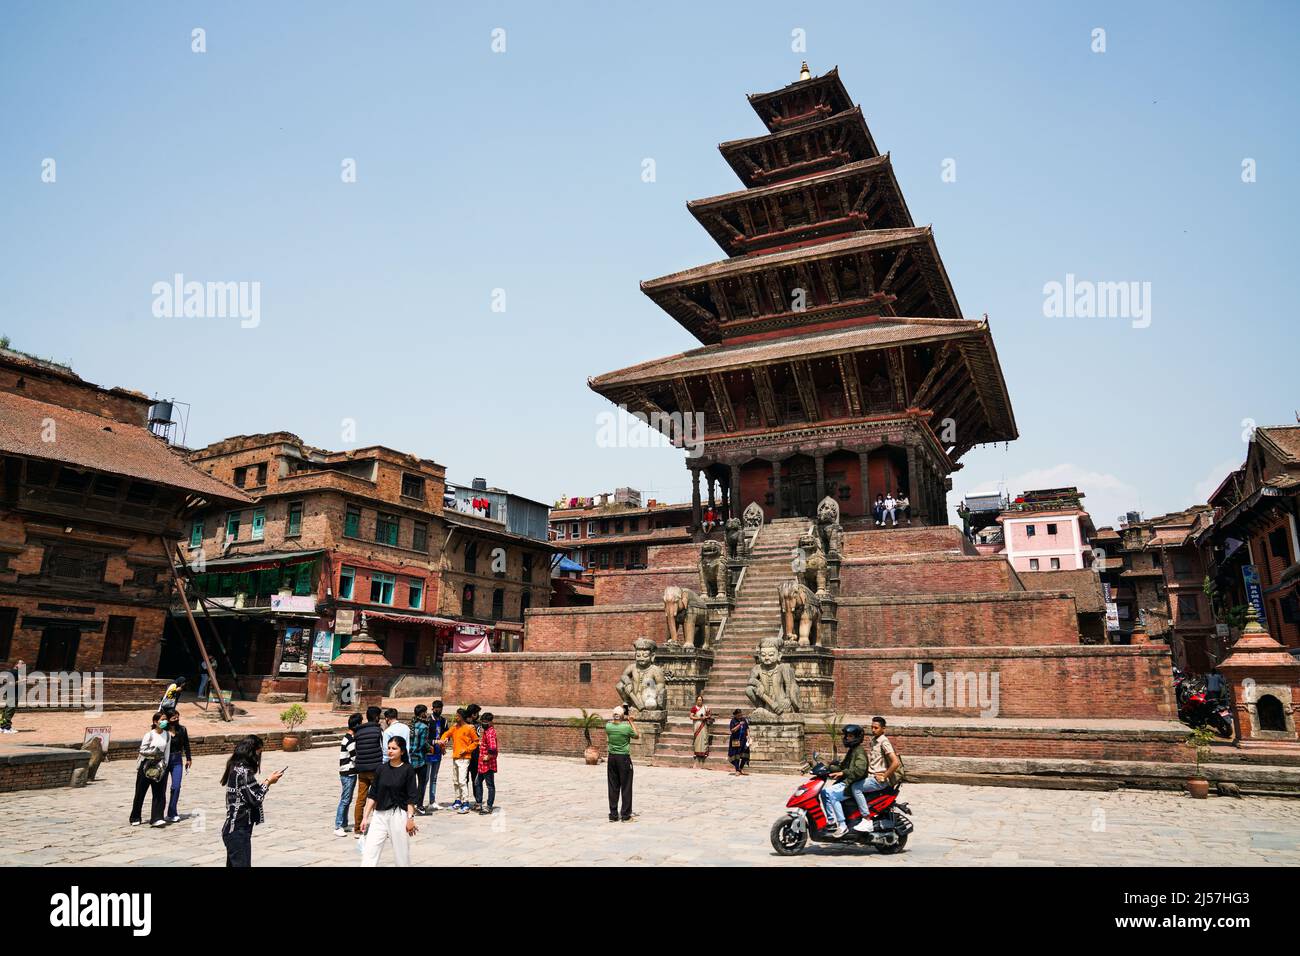 Temples in the temple district of Patan, Kathmandu, Nepal   ---   Tempel im Tempelbezirk Patan, Kathmandu, Nepal Stock Photo